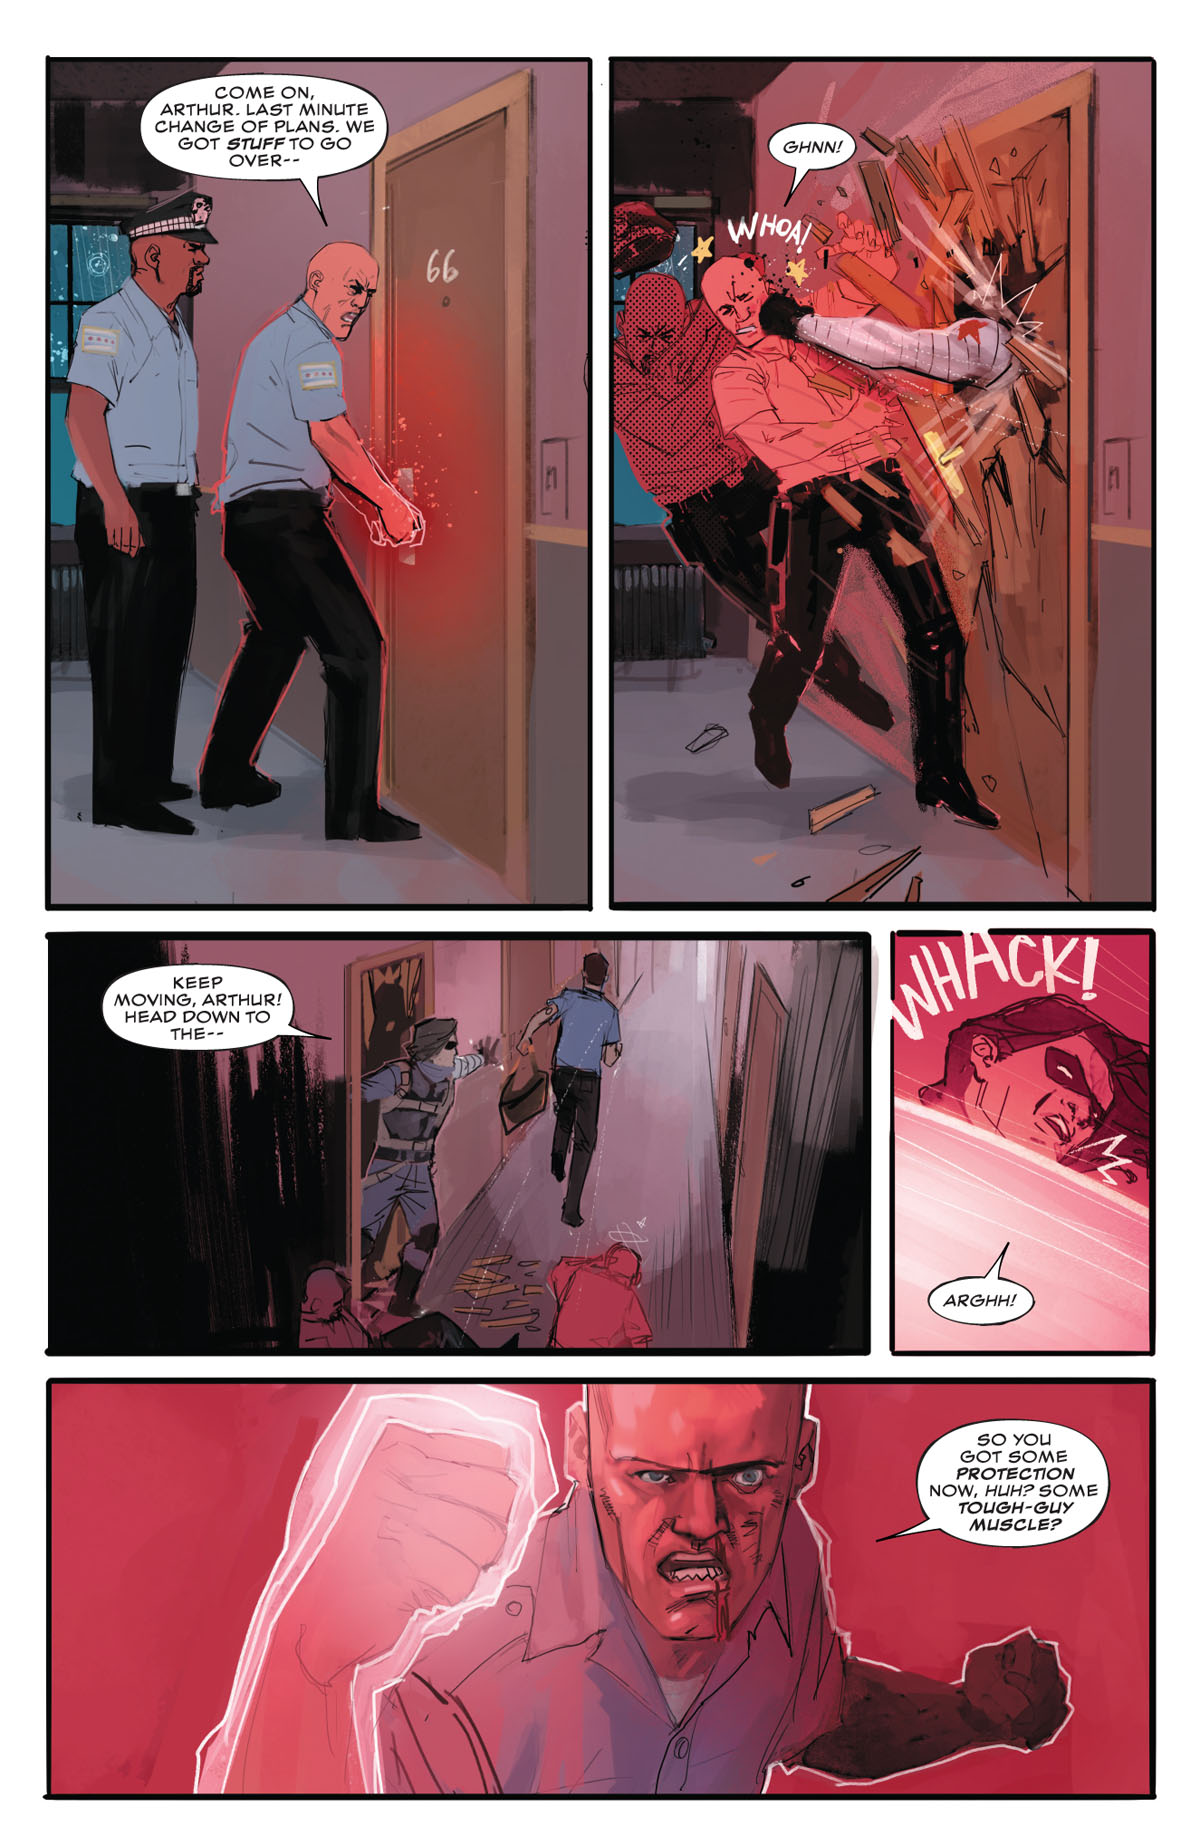 Winter Soldier #1 page 5